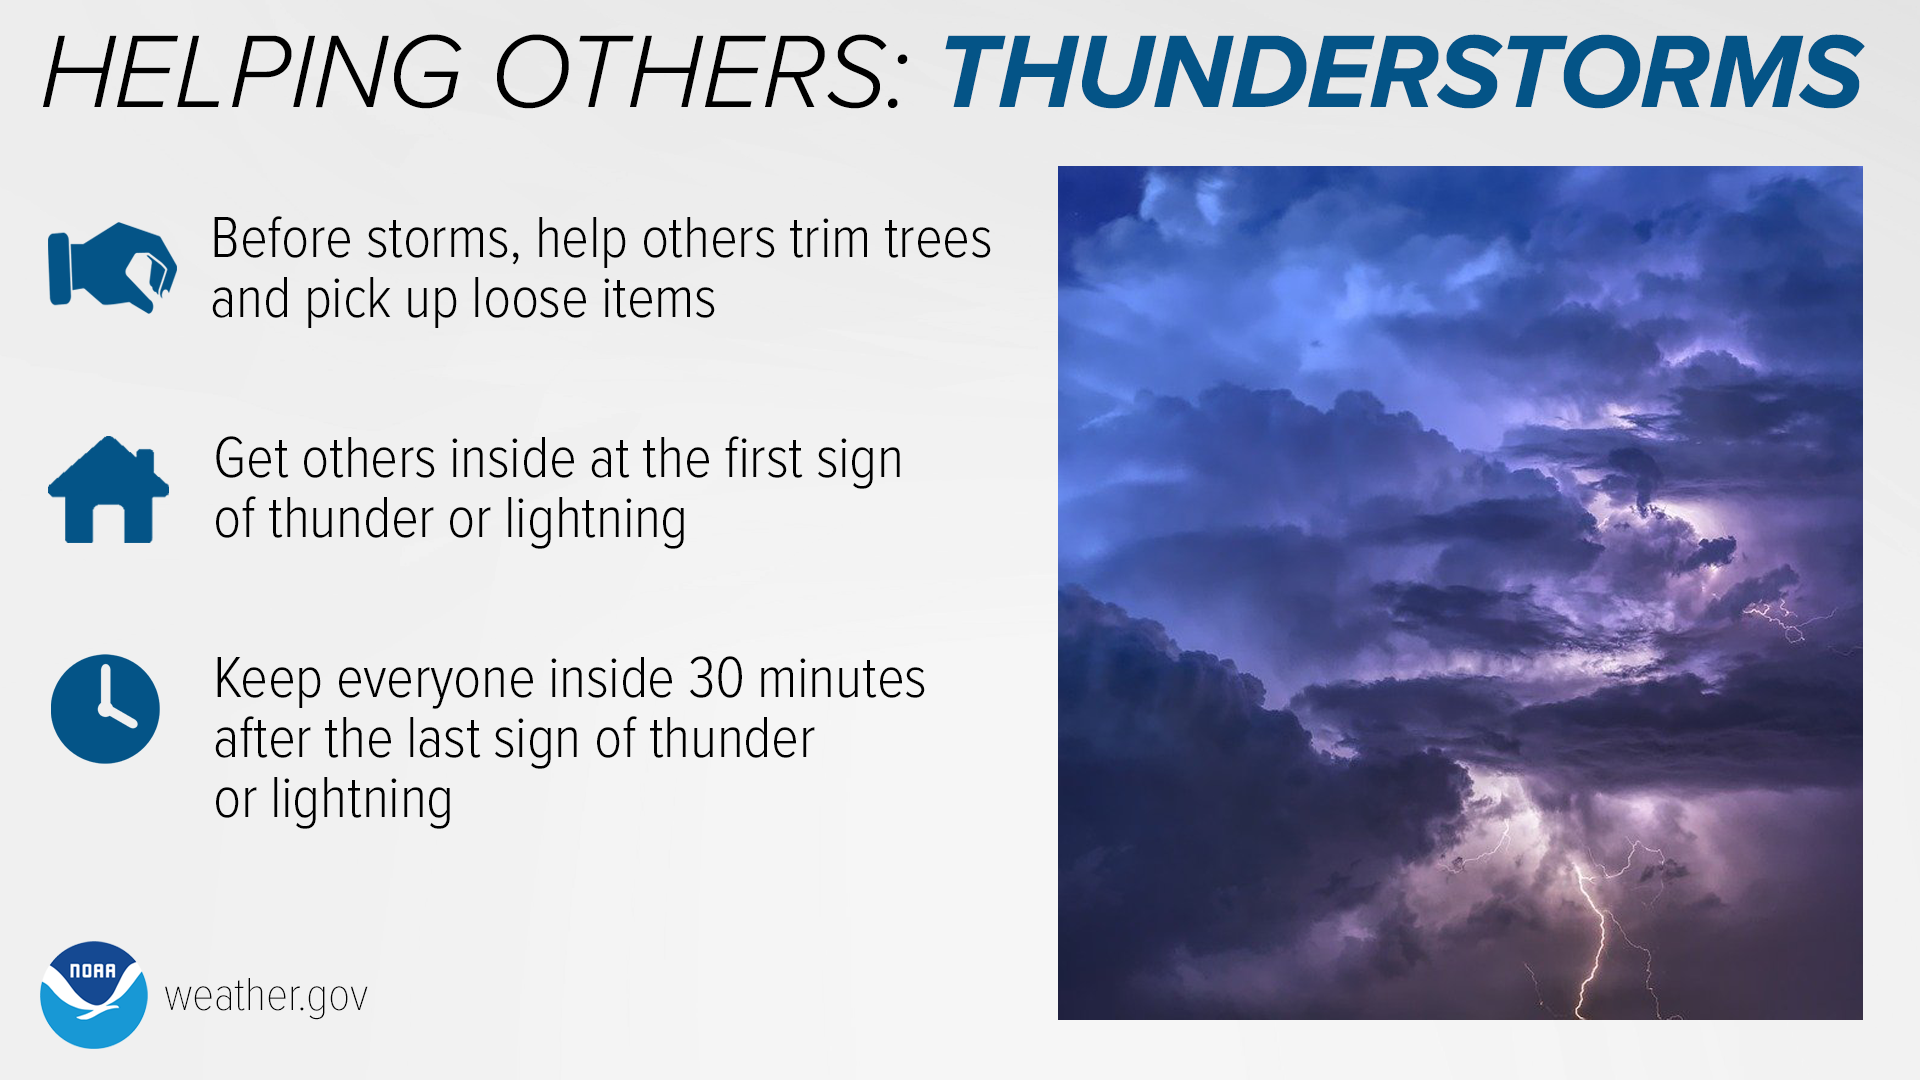 Know before you go. It’s best to stay inside at the first sign of thunder and lightning and 30 minutes after the last sign of a storm.